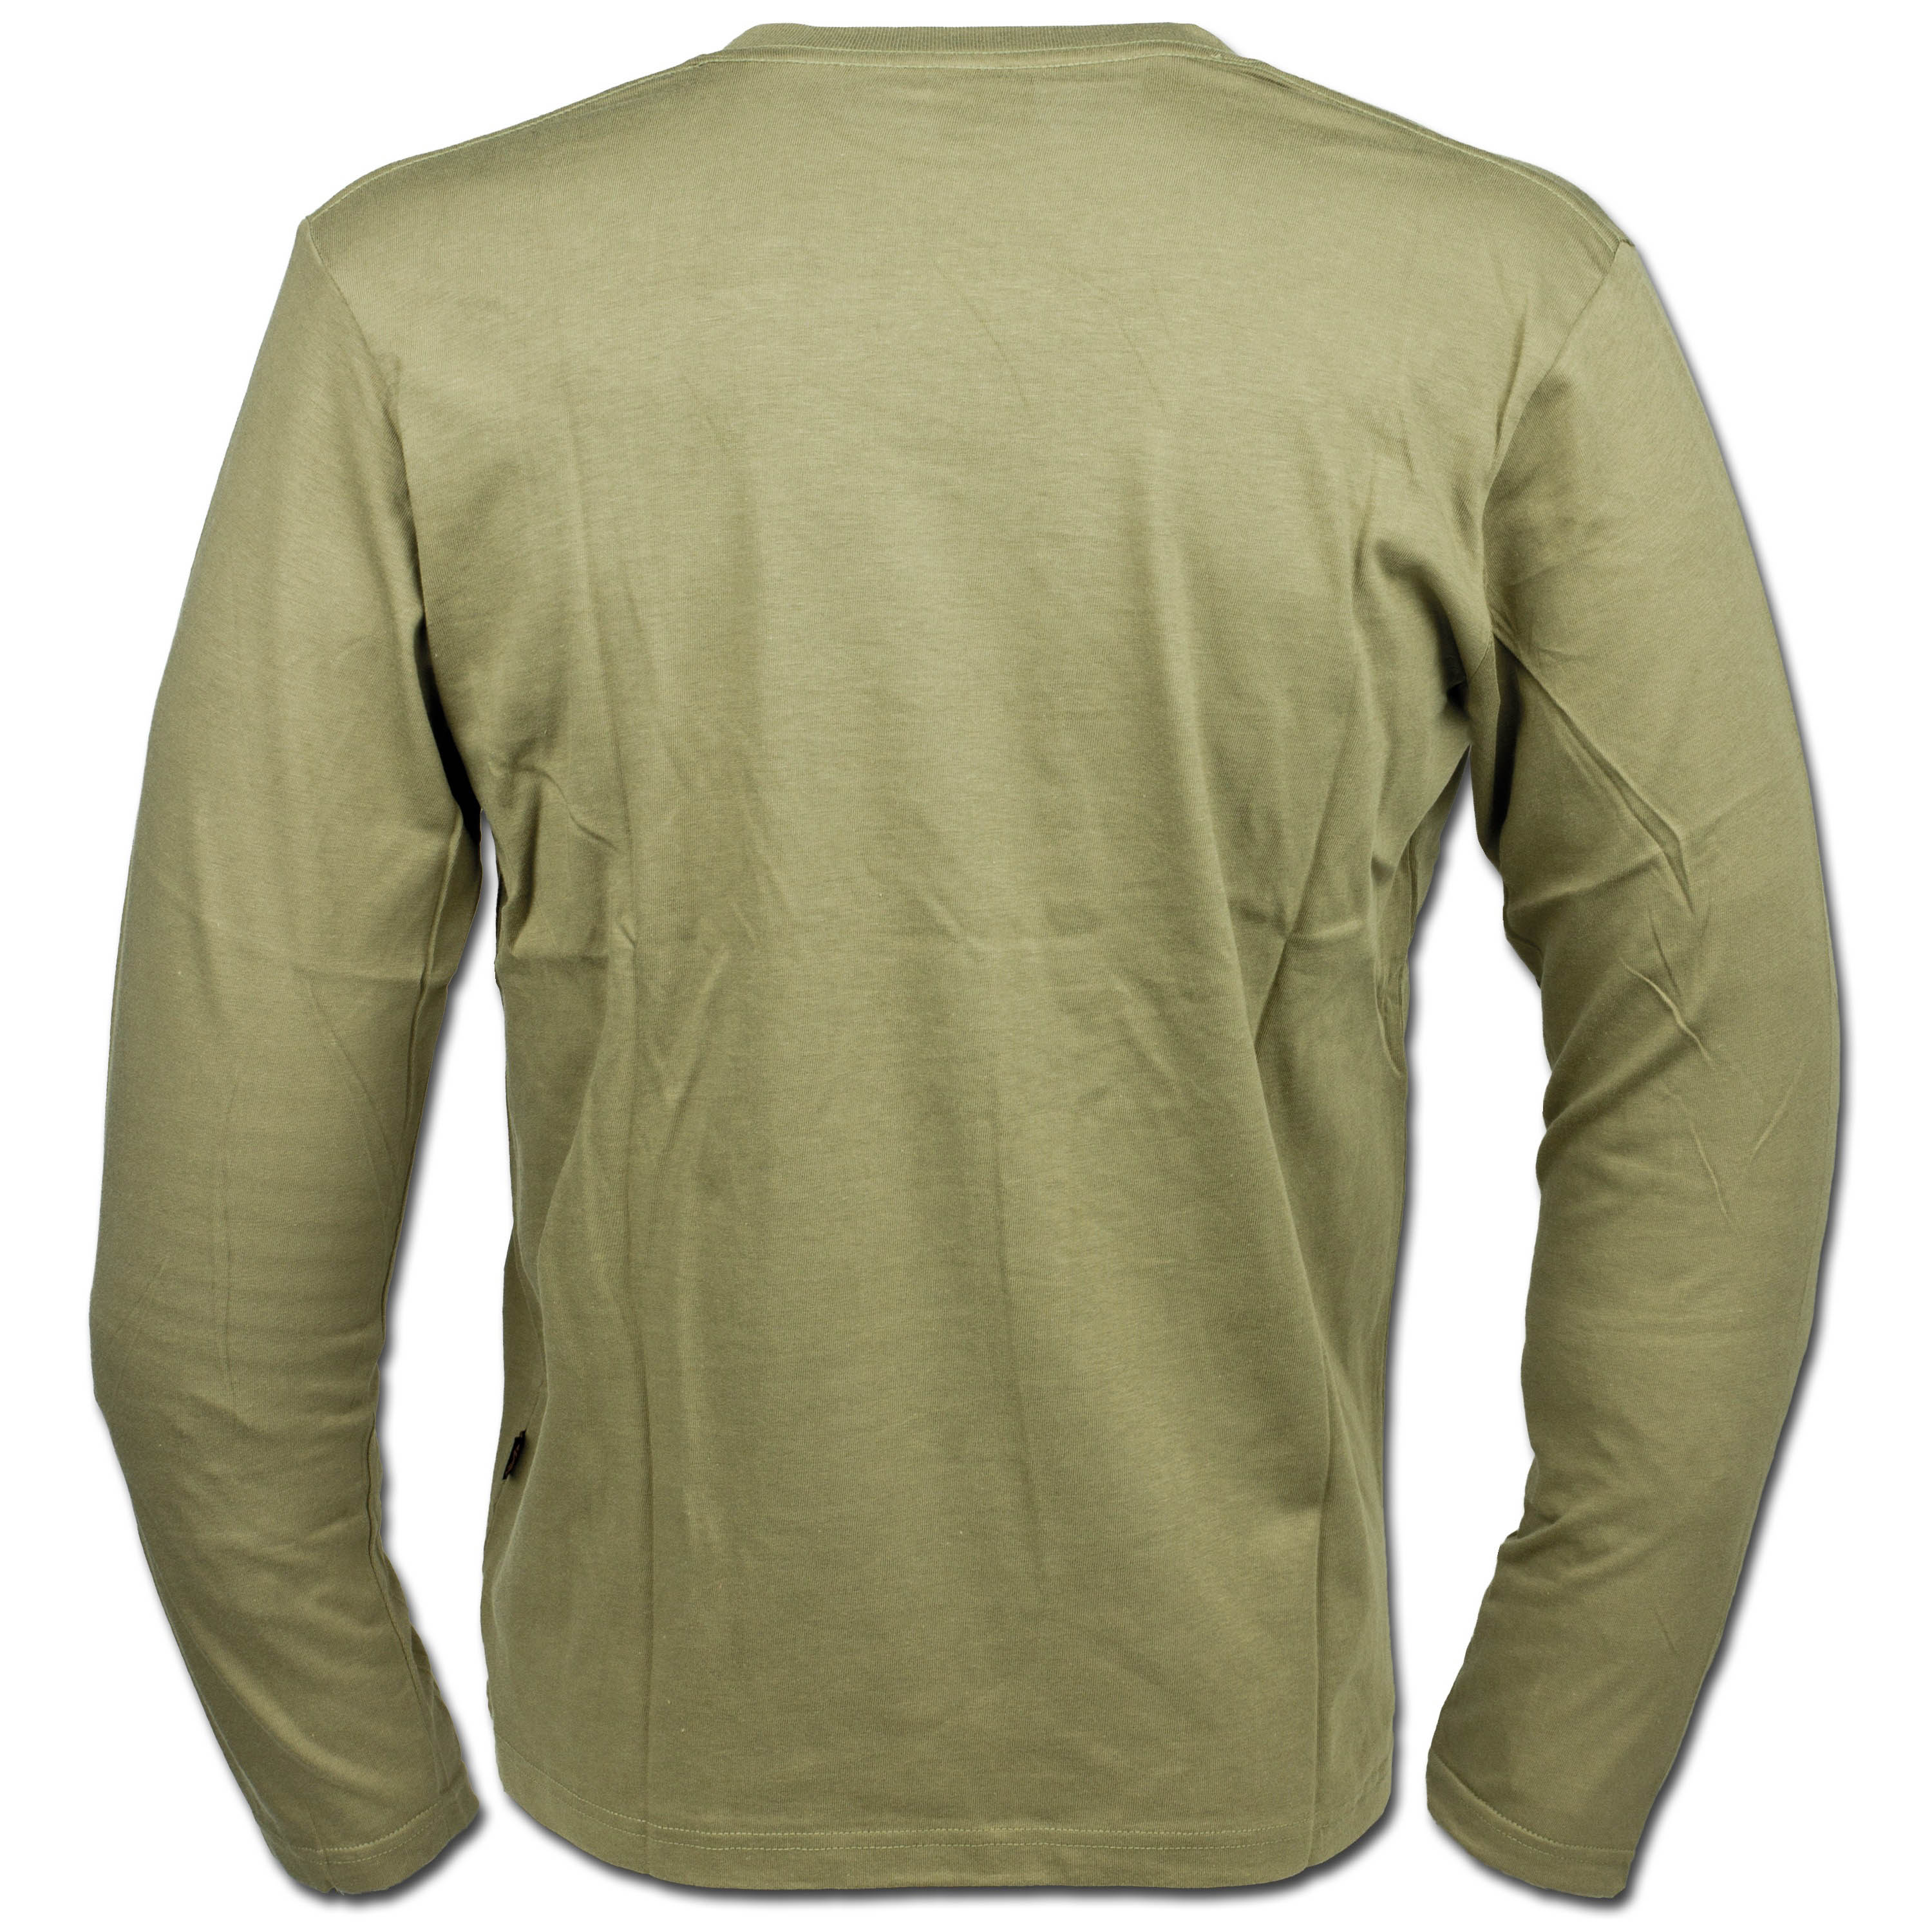 T-Shirt Alpha Industries Long Arm olive | T-Shirt Alpha Industries Long Arm  olive | Shirts | Shirts | Men | Clothing